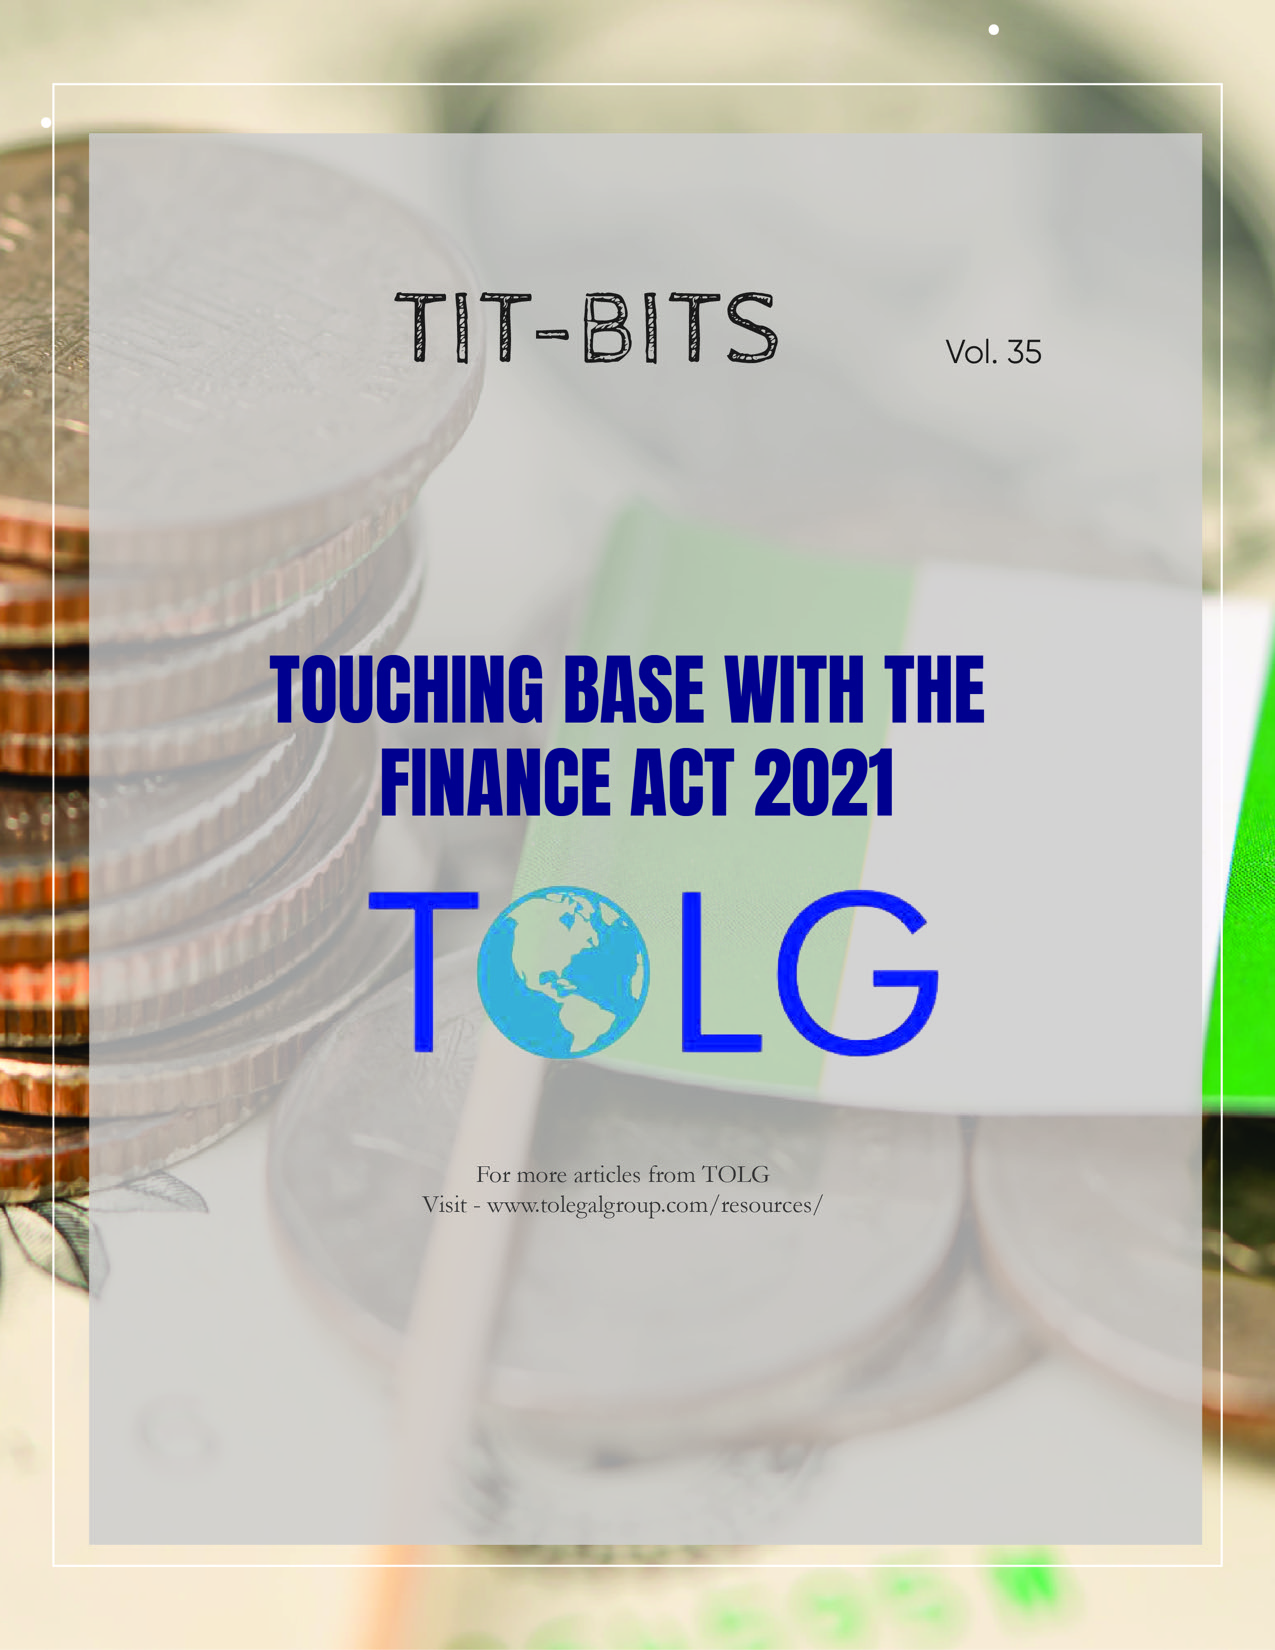 Touching-base-with-finance-act-2021